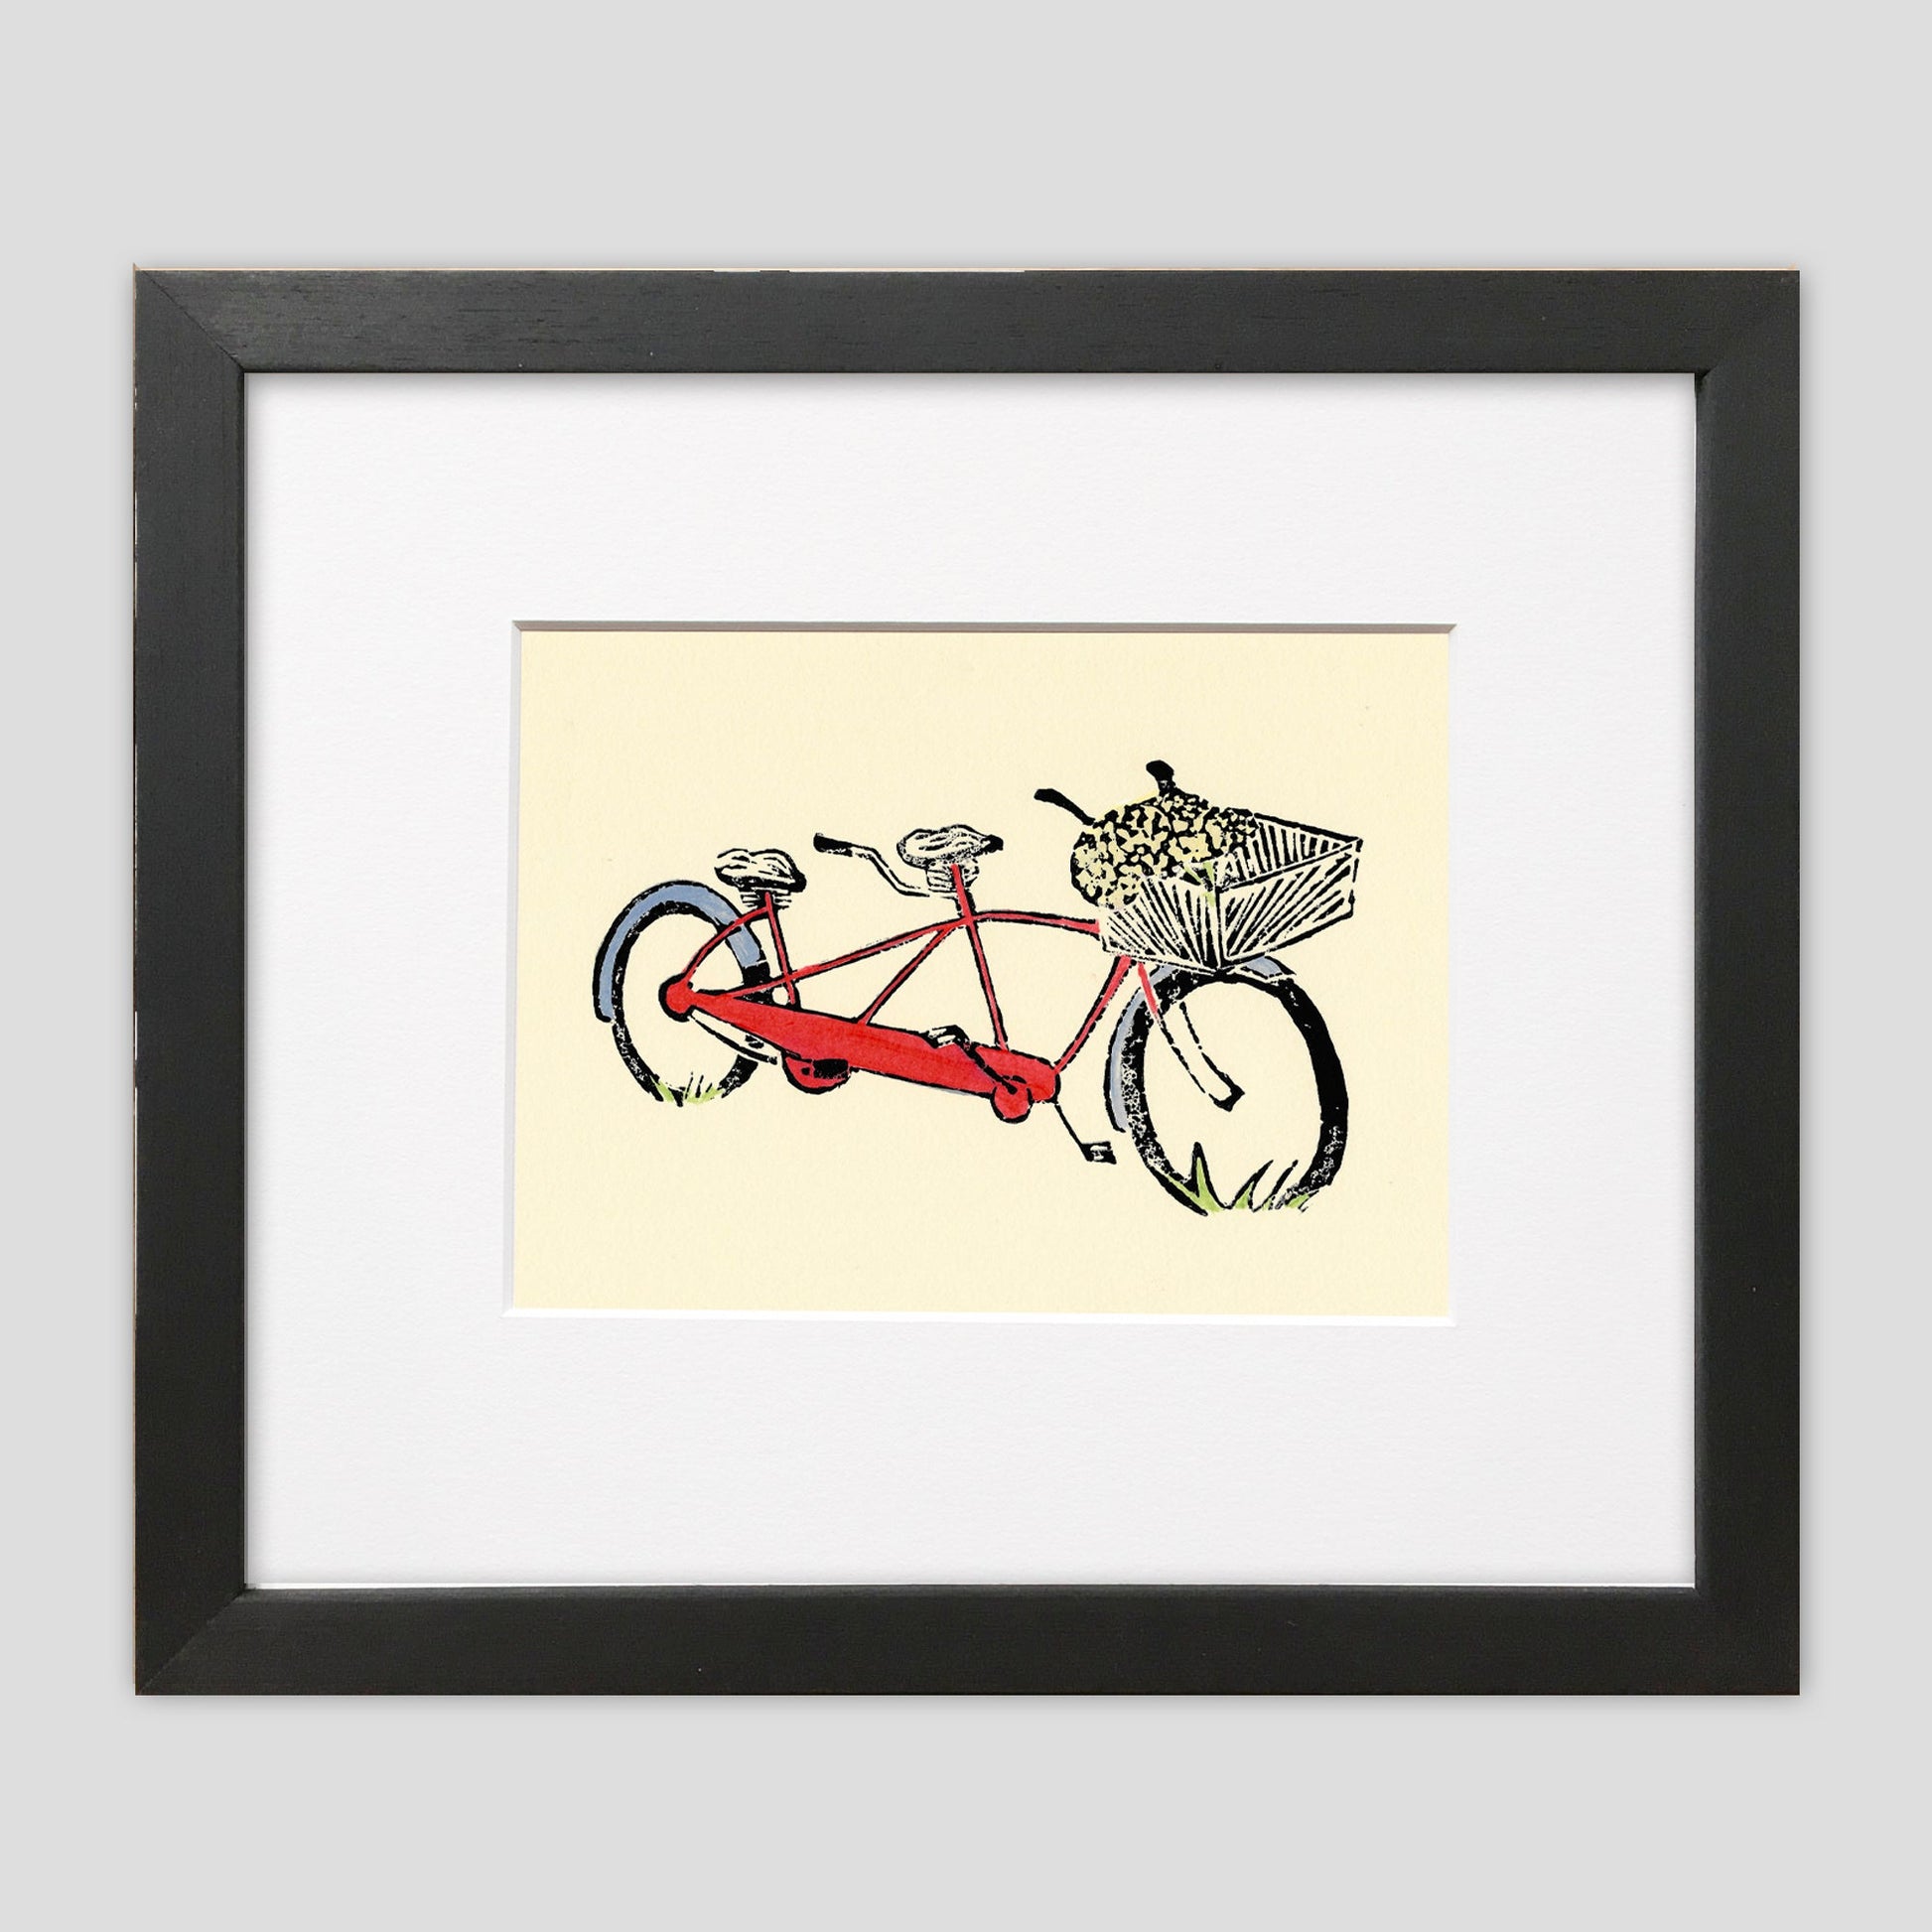 Framed bicycle art created by Natalia Wohletz of Peninsula Prints, Mackinac Island.  Red Tandem is a multicolor linoleum block print of a striking bicycle for two!